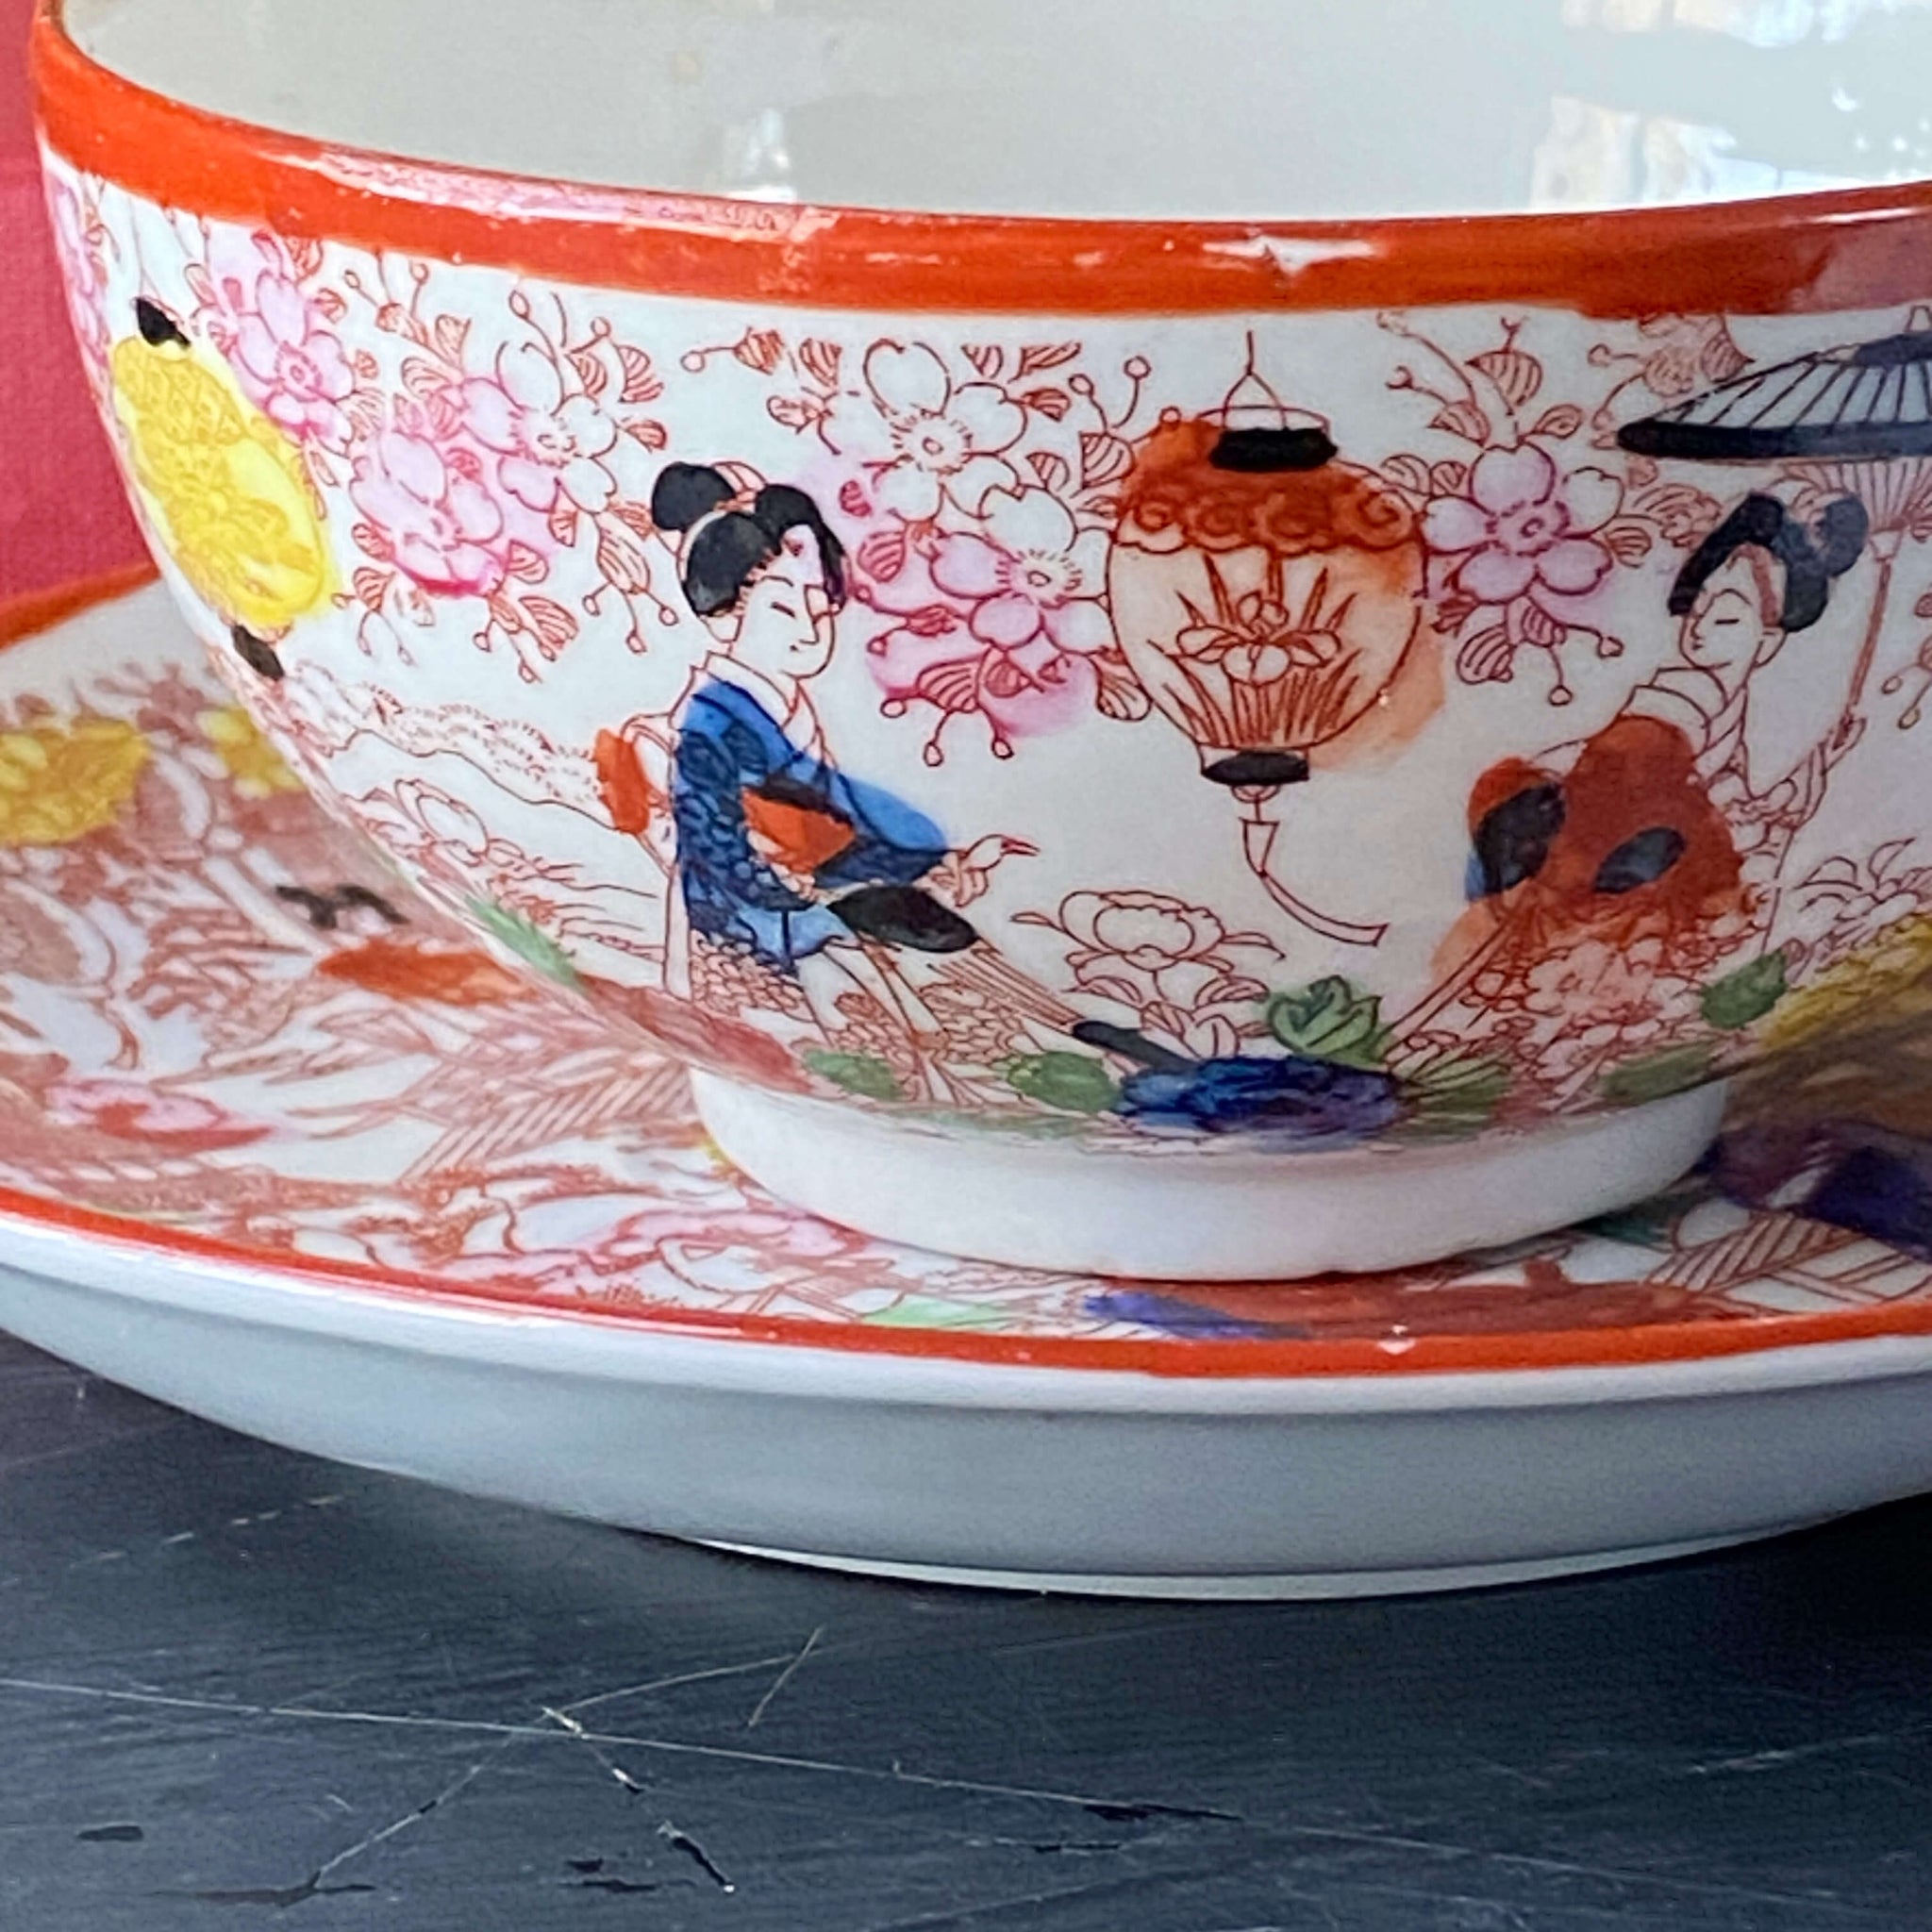 Vintage Takito Japan Cup and Saucer with Cherry Blossoms, Geisha Girls and Asian Pastoral Scene circa 1921-1948